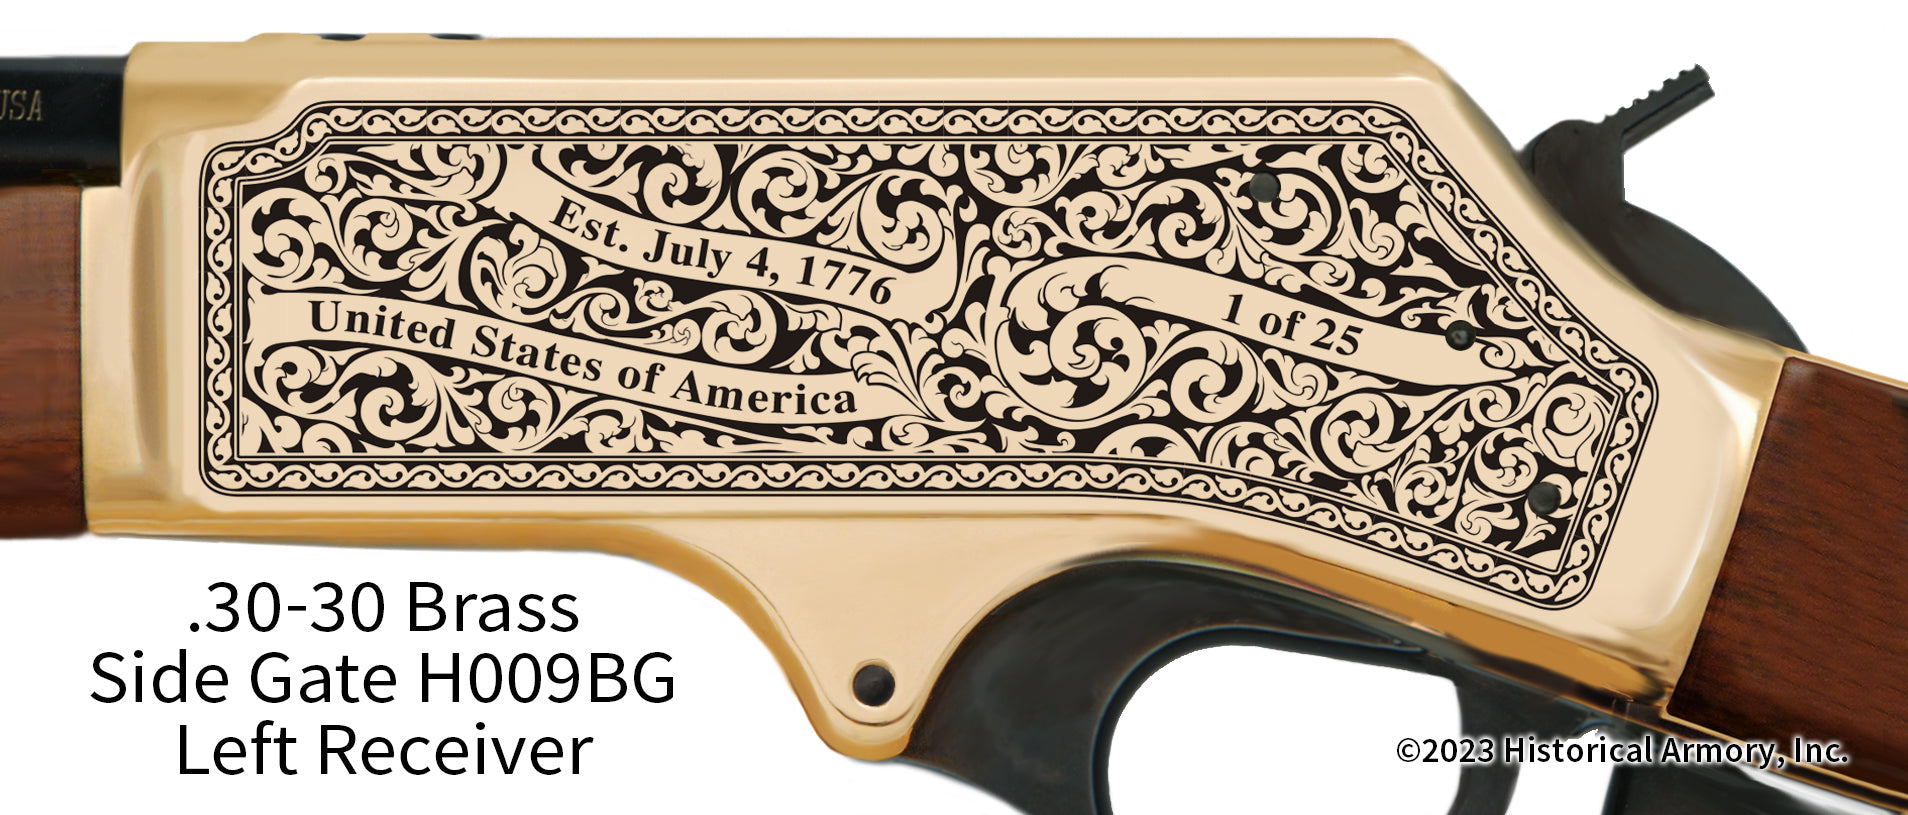 Pearl River County Mississippi Engraved Henry .30-30 Brass Side Gate Rifle